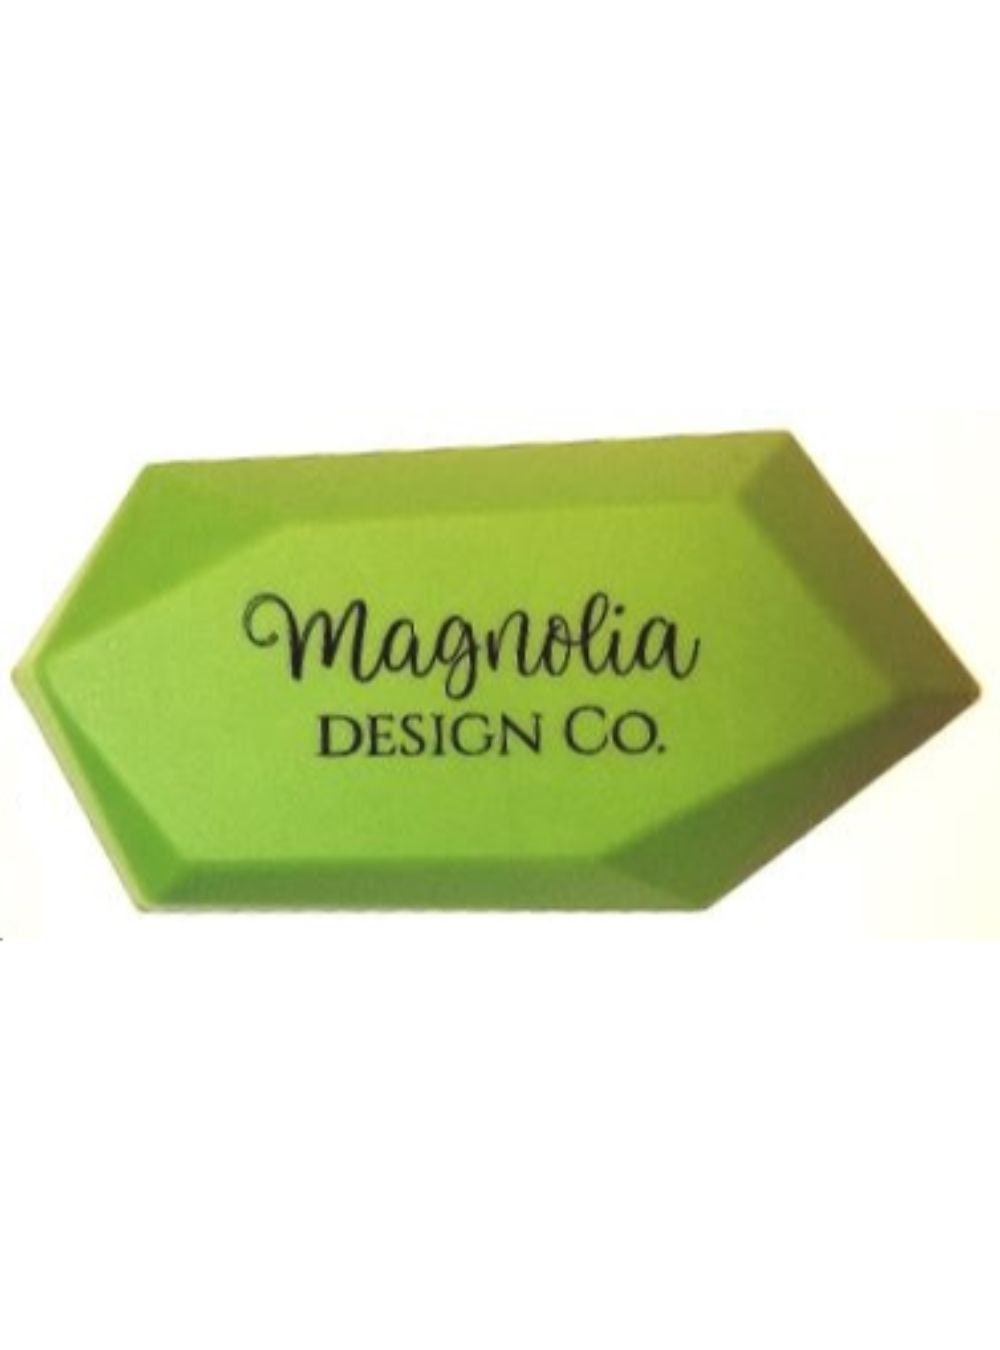 Magnolia Curved Shop Squeegee, 36